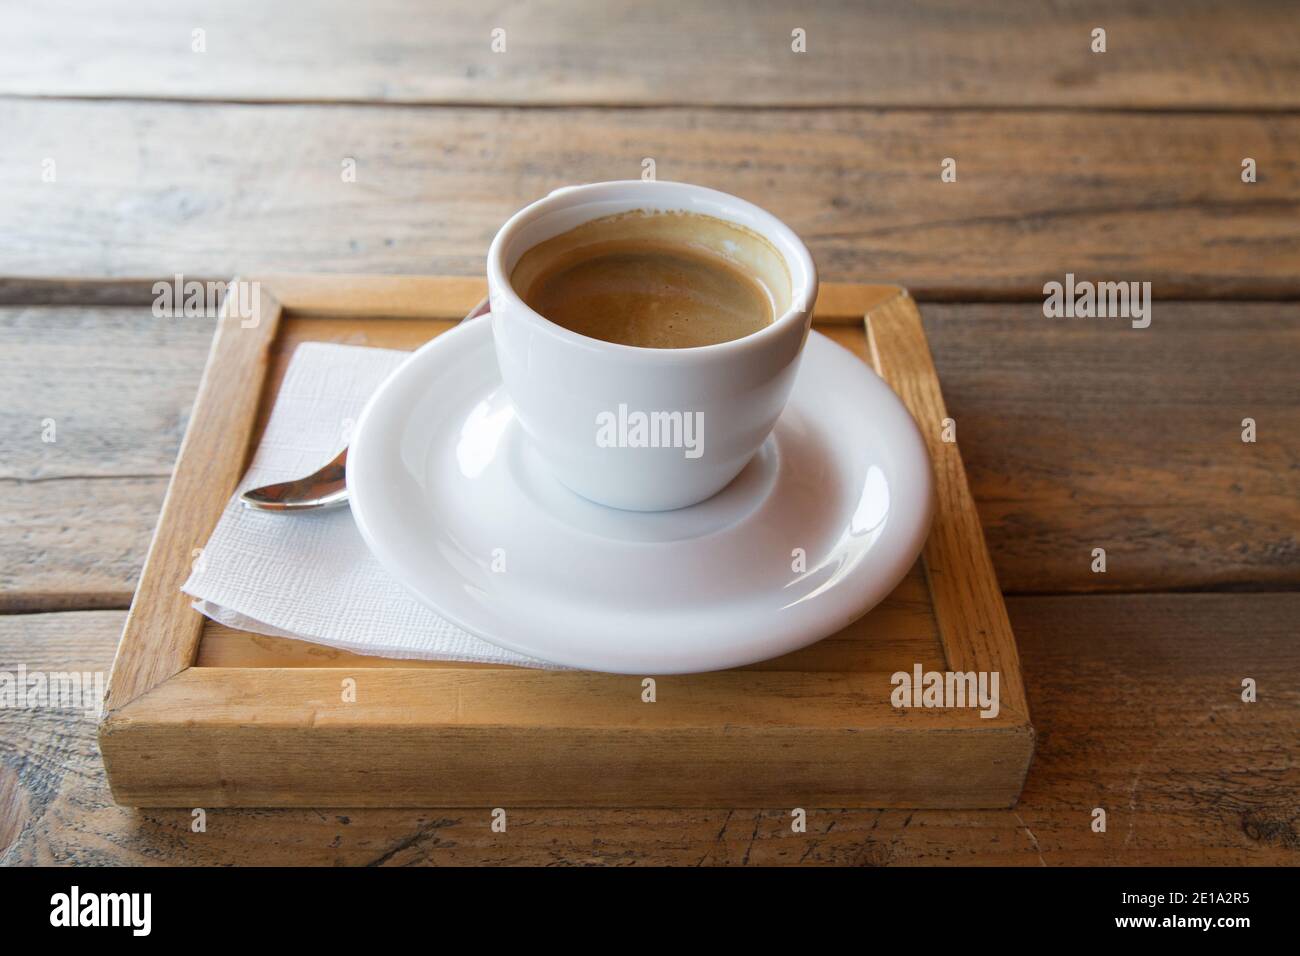 Cup of coffee on a wooden table. Close-up. Stock Photo